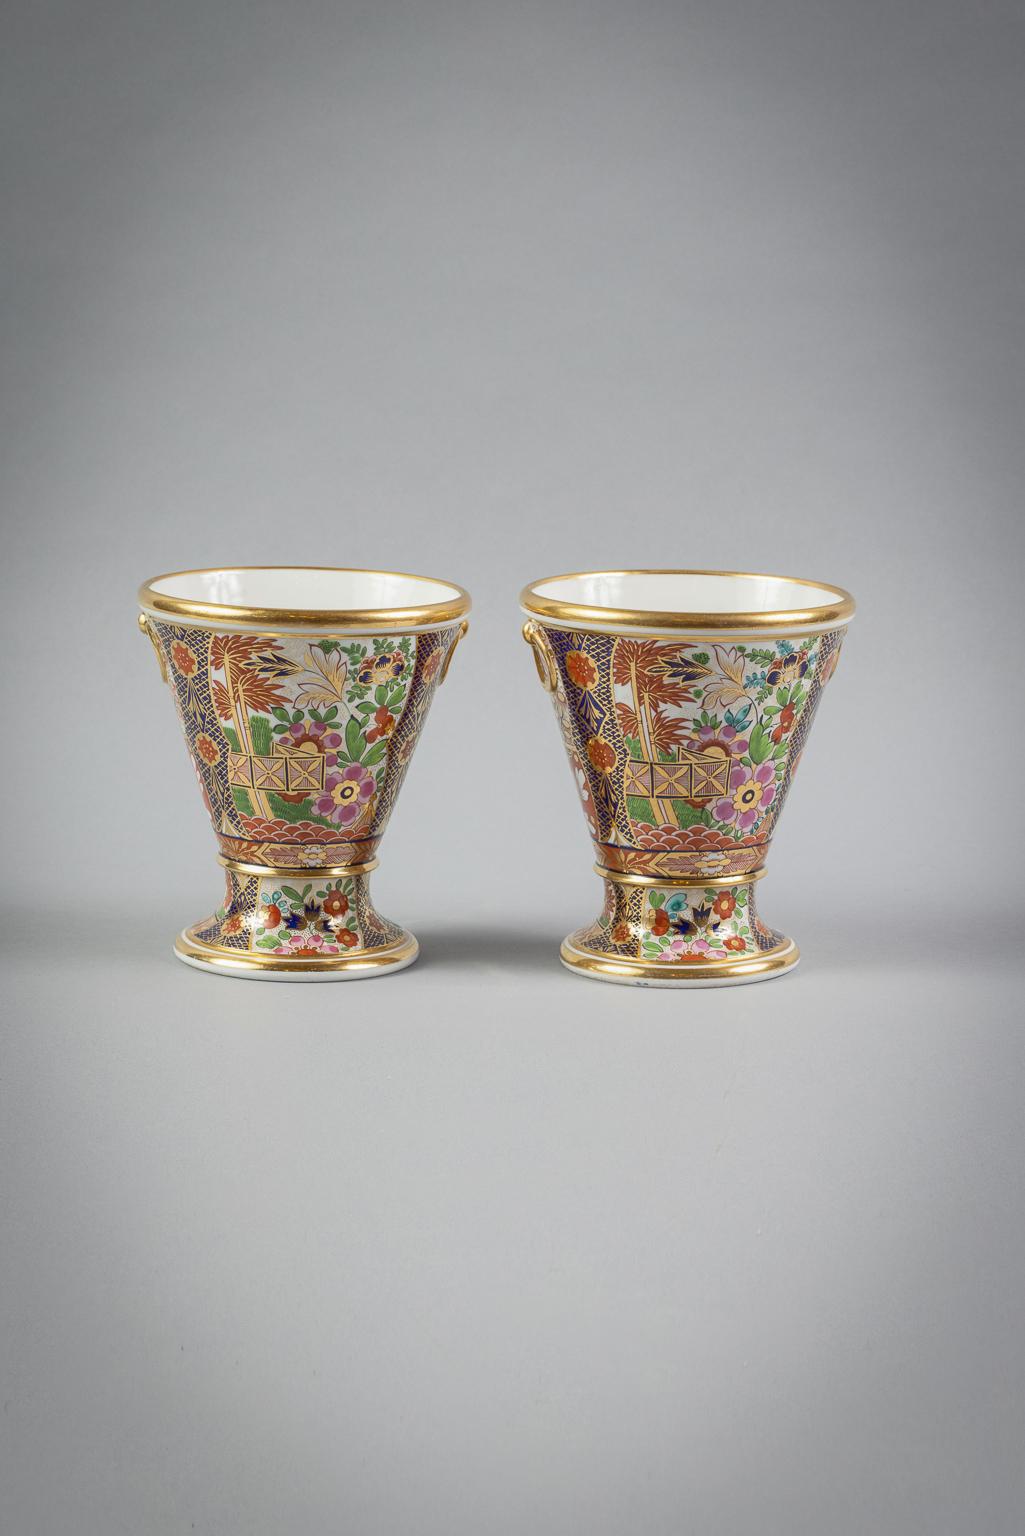 Pair of English Porcelain 'Japan' Pattern Vases, Barr Flight & Barr, circa 1810 In Good Condition For Sale In New York, NY